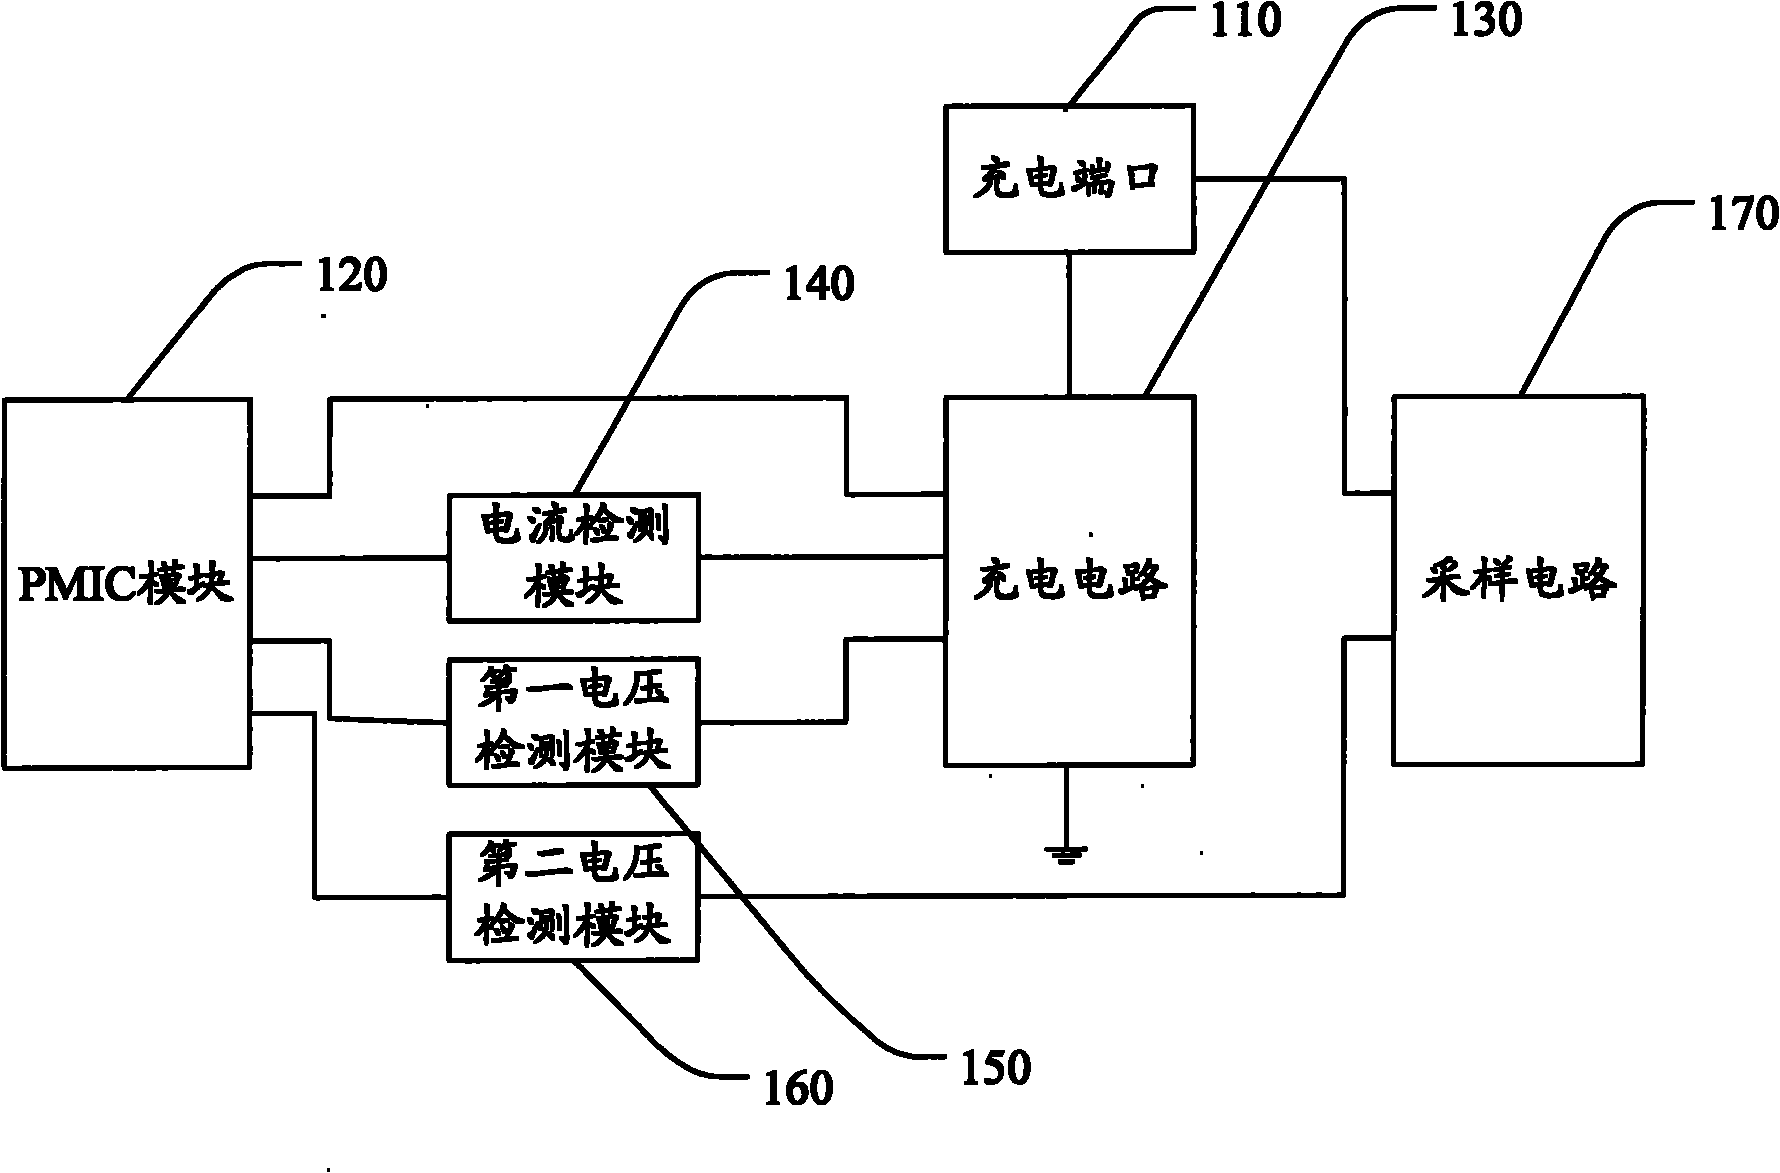 Mobile terminal of automatically setting charging current and implementation method thereof